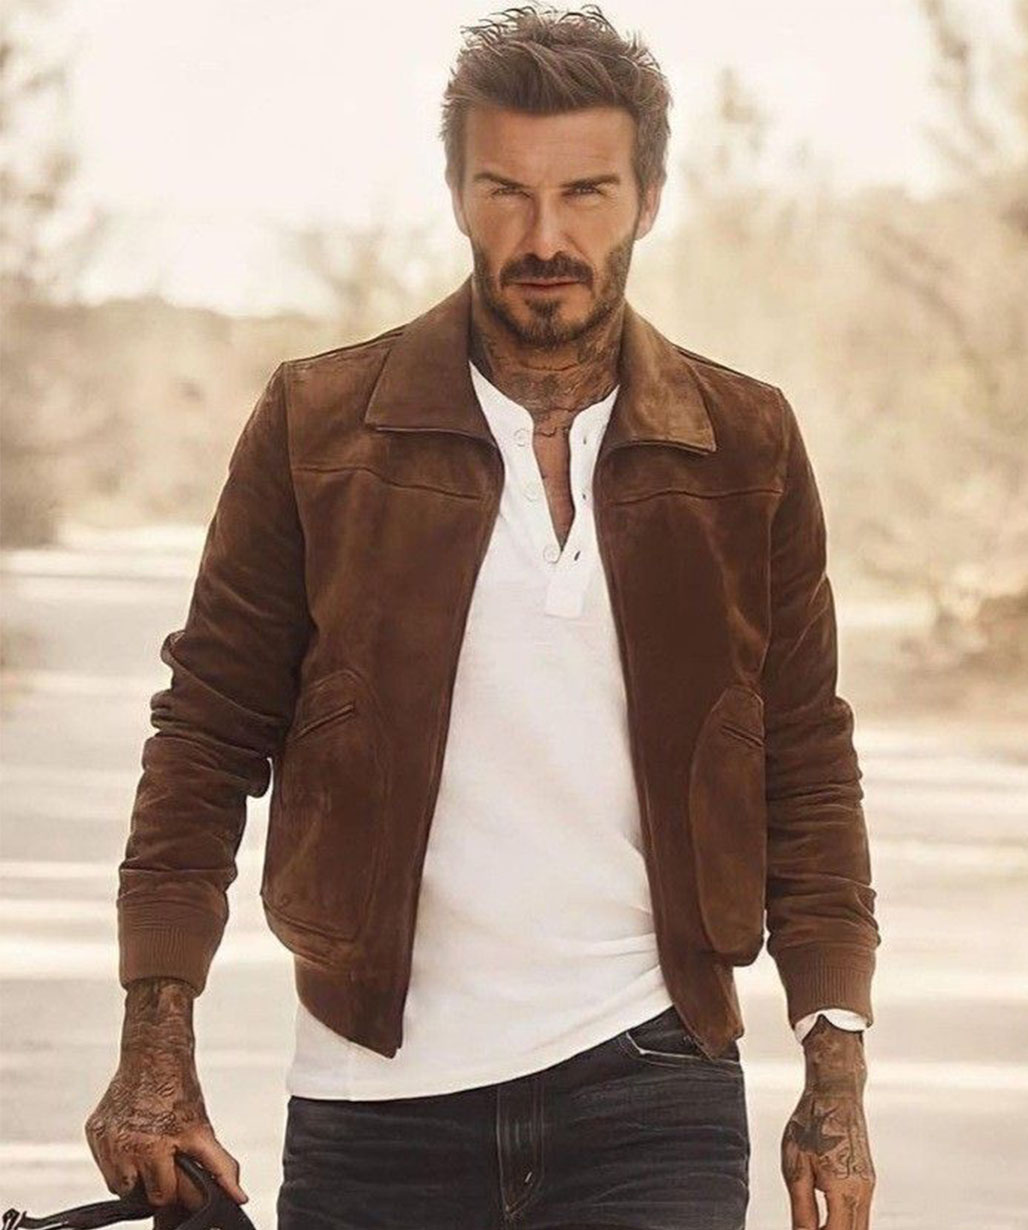 save-our-squad-david-beckham-suede-leather-jacket